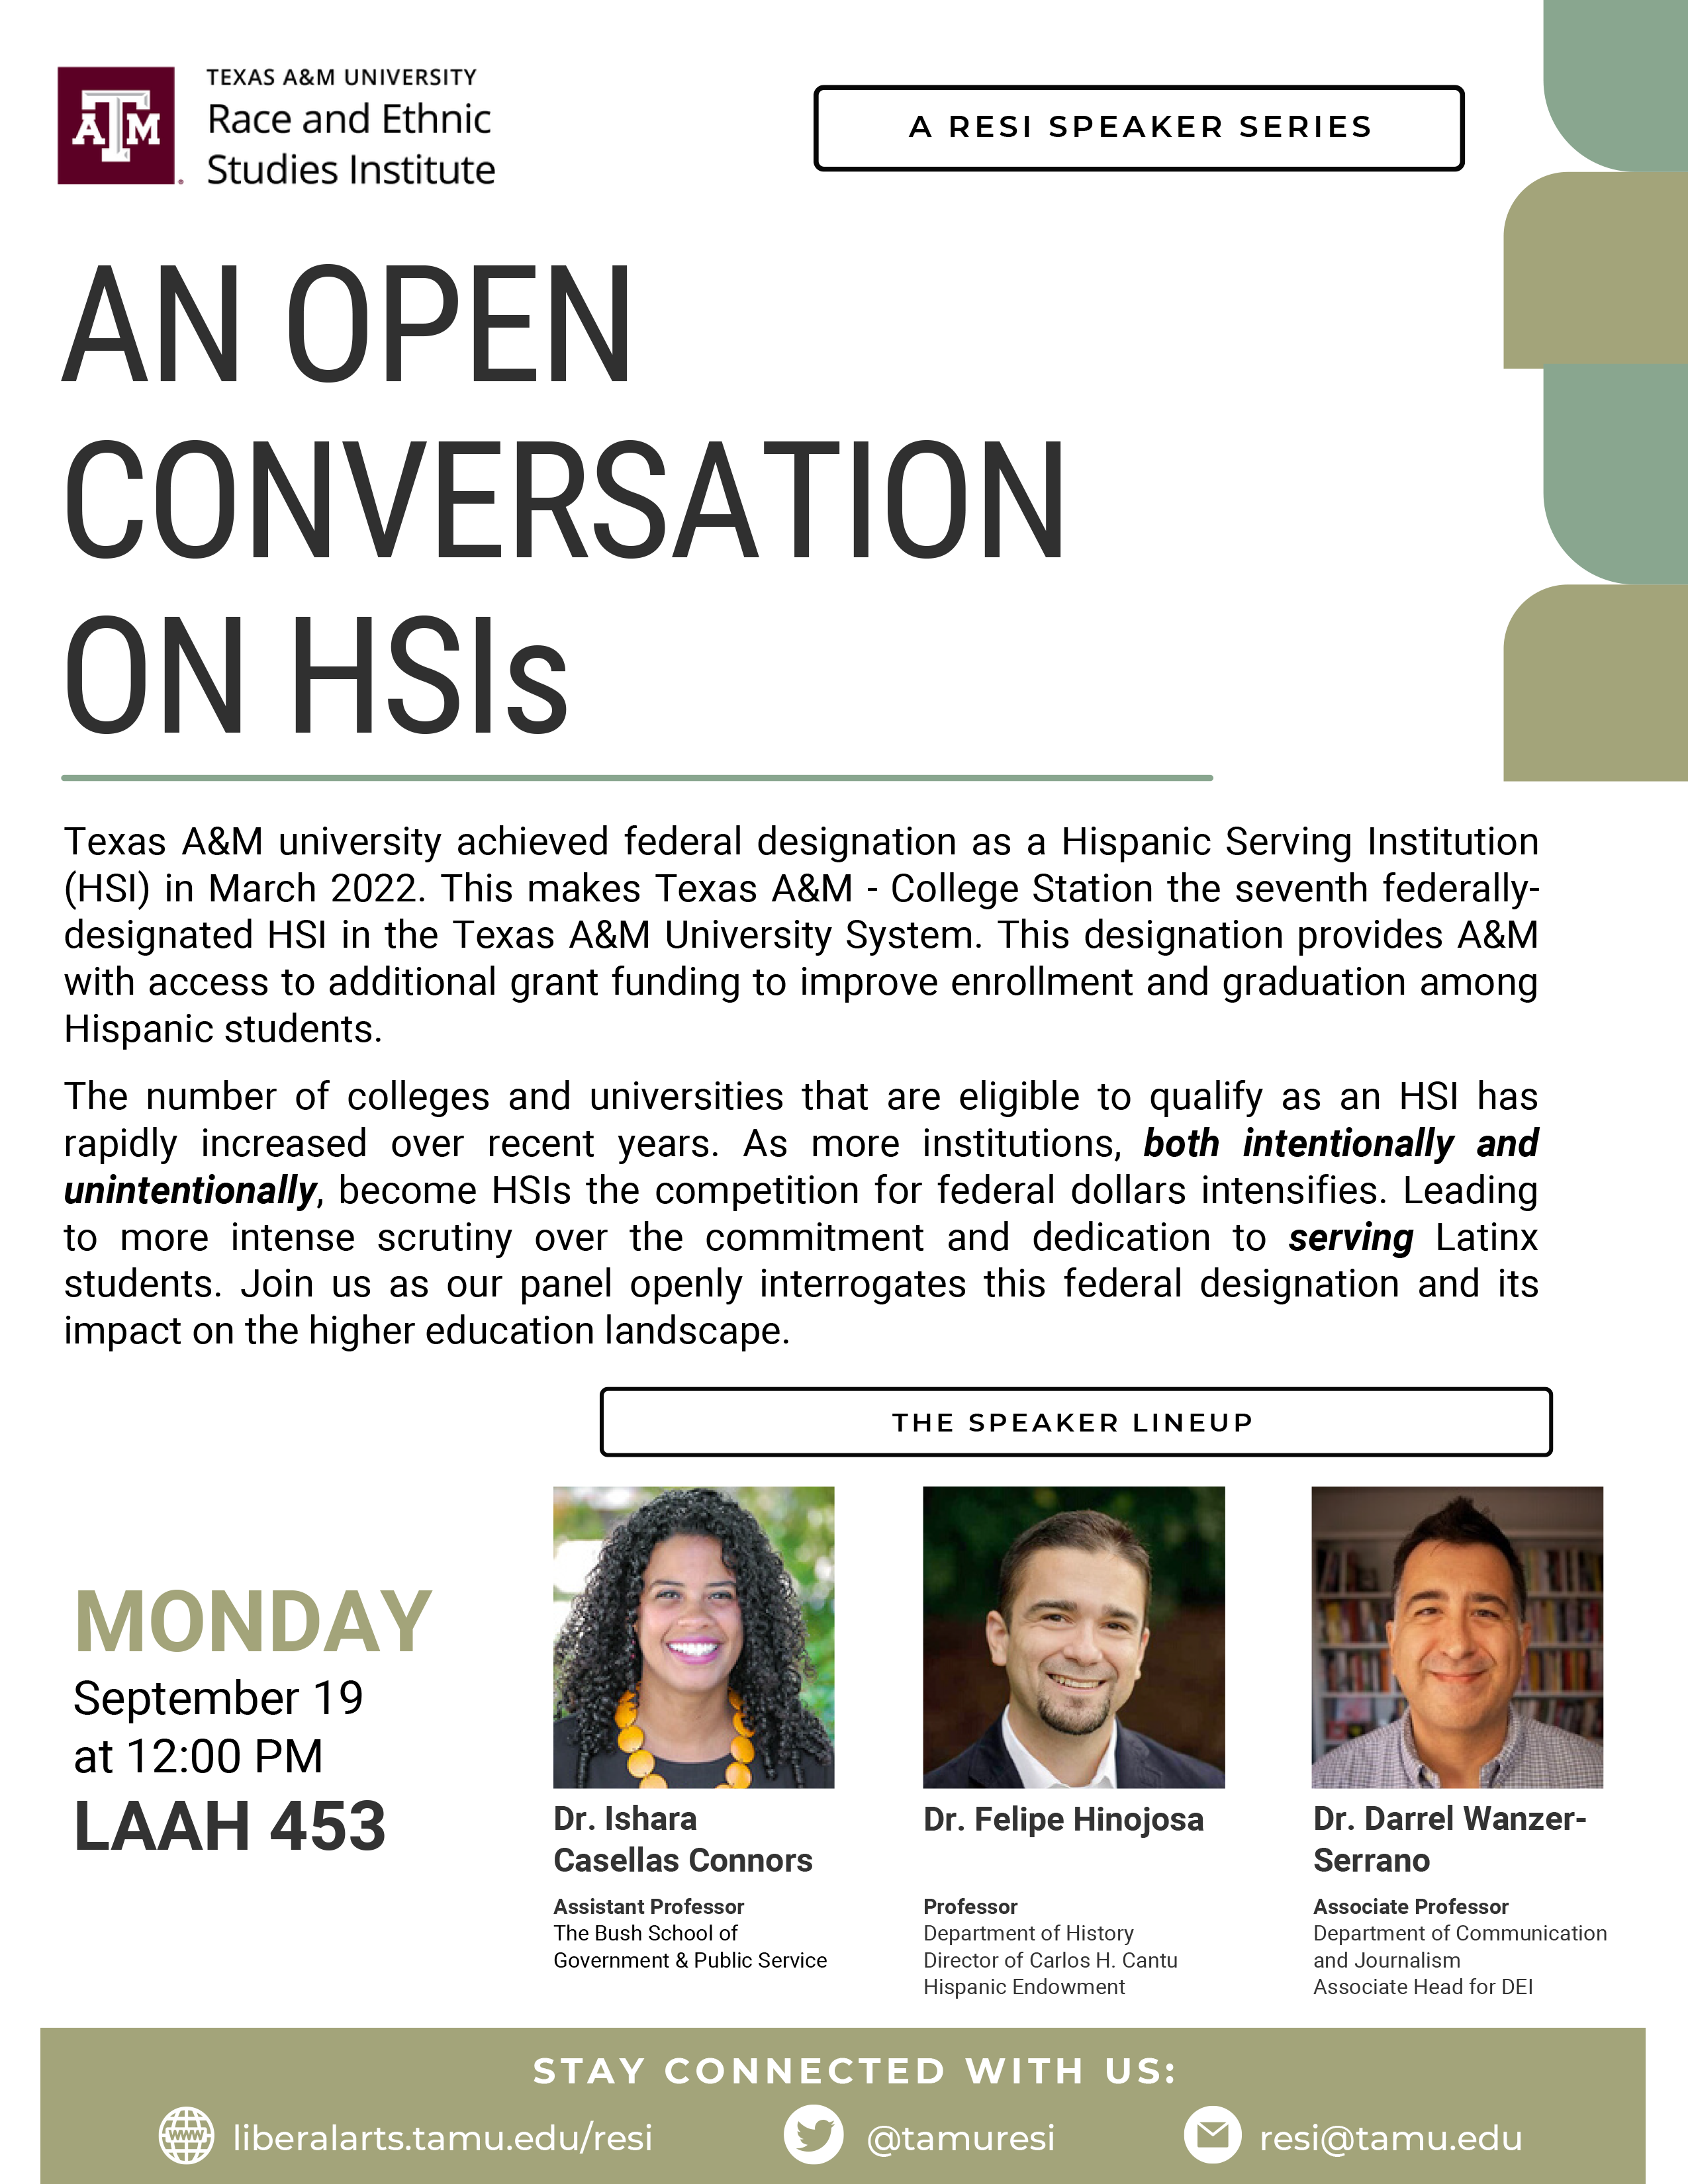 Flyer describing upcoming event, An Open Conversation on Hispanic Serving Institutions